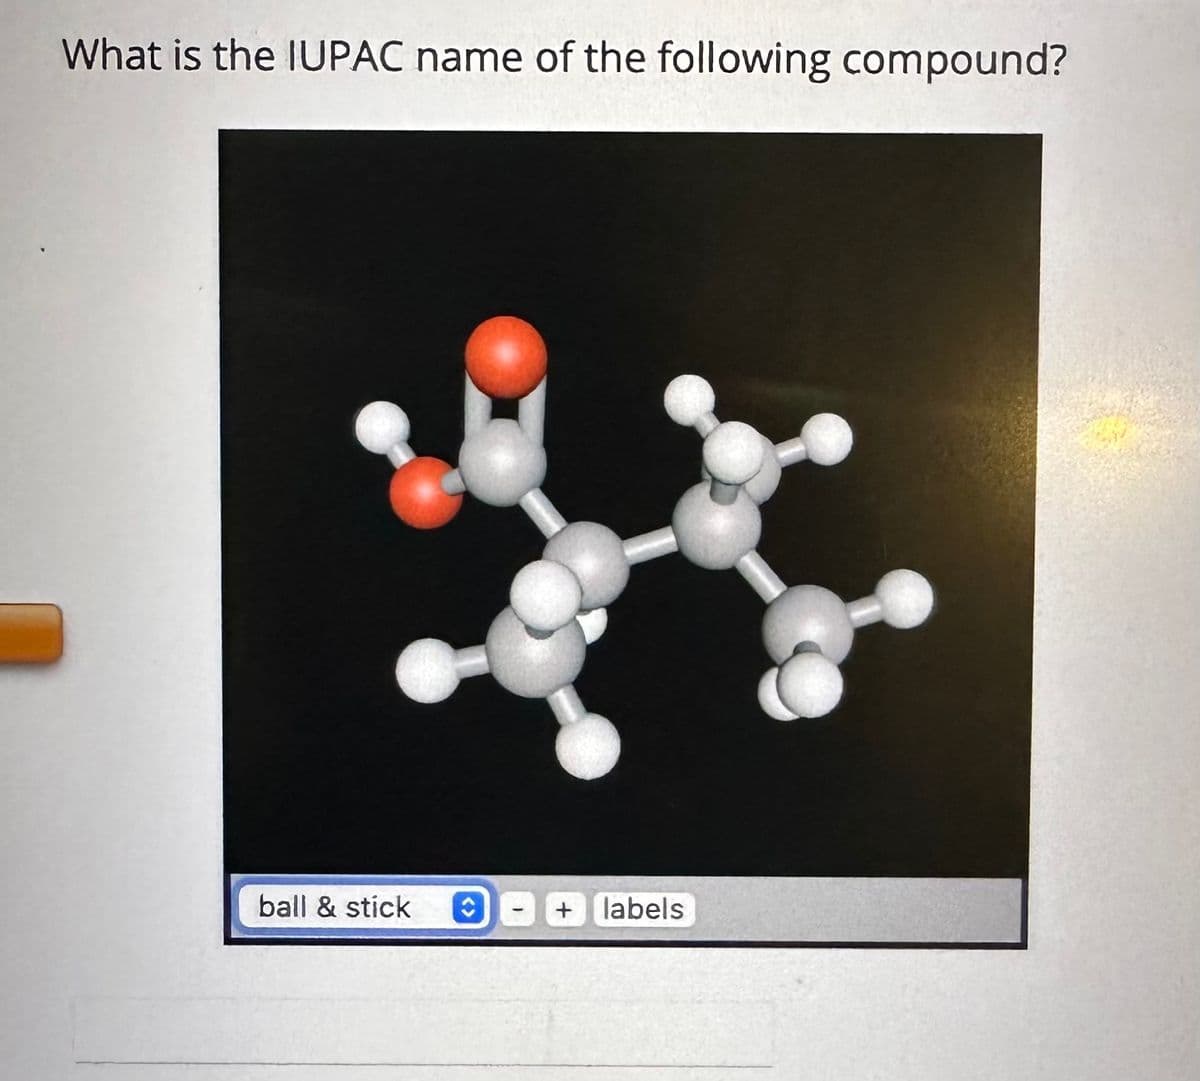 What is the IUPAC name of the following compound?
ball & stick ŵ
+ labels